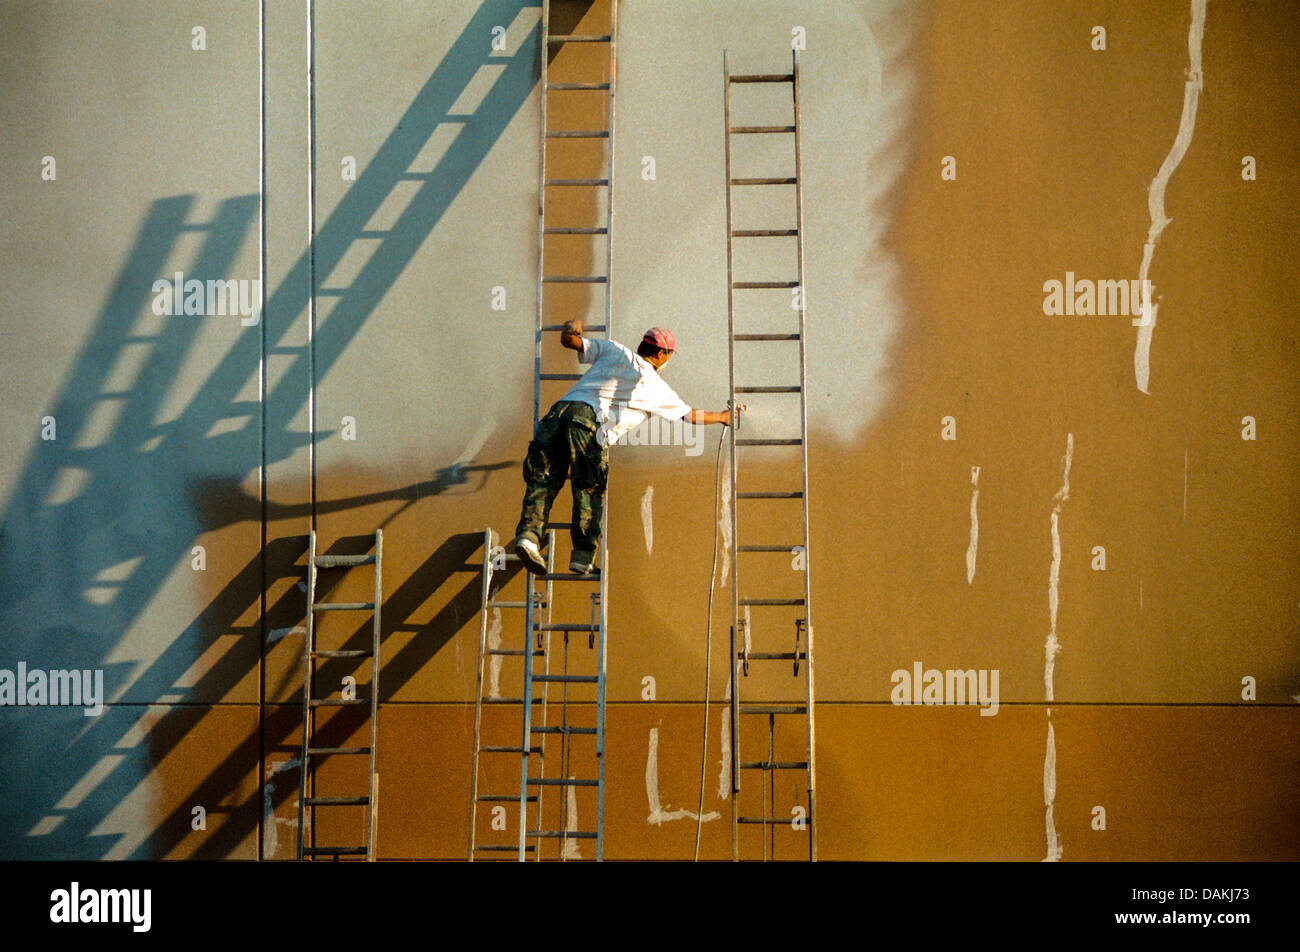 Balancing on a ladder, a Hispanic workman spray paints a factory wall in Irvine, CA. Note long shadows from afternoon sun. Stock Photo